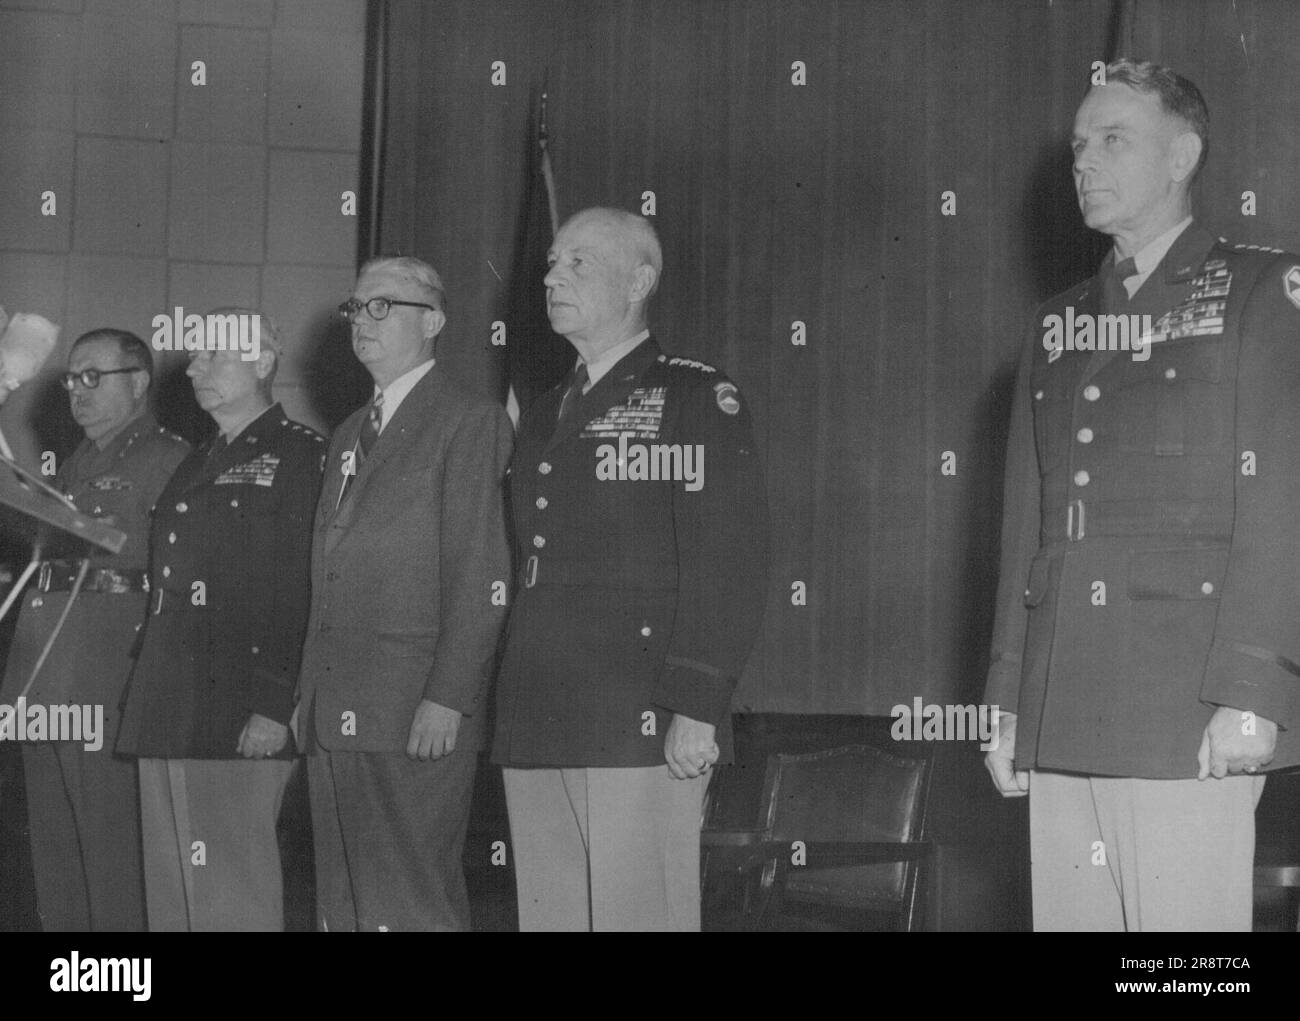 Former UN Supreme Commander Gen. John E. Hull (2nd from right) left Japan on March 31st giving up his command to Gen. Maxwell D. Taylor (right). On left is Commonwealth Commander Lt. Gen Rudolph Bierwirth and in centre US Secretary of the Army Robert Stevens. April 26, 1955. Stock Photo